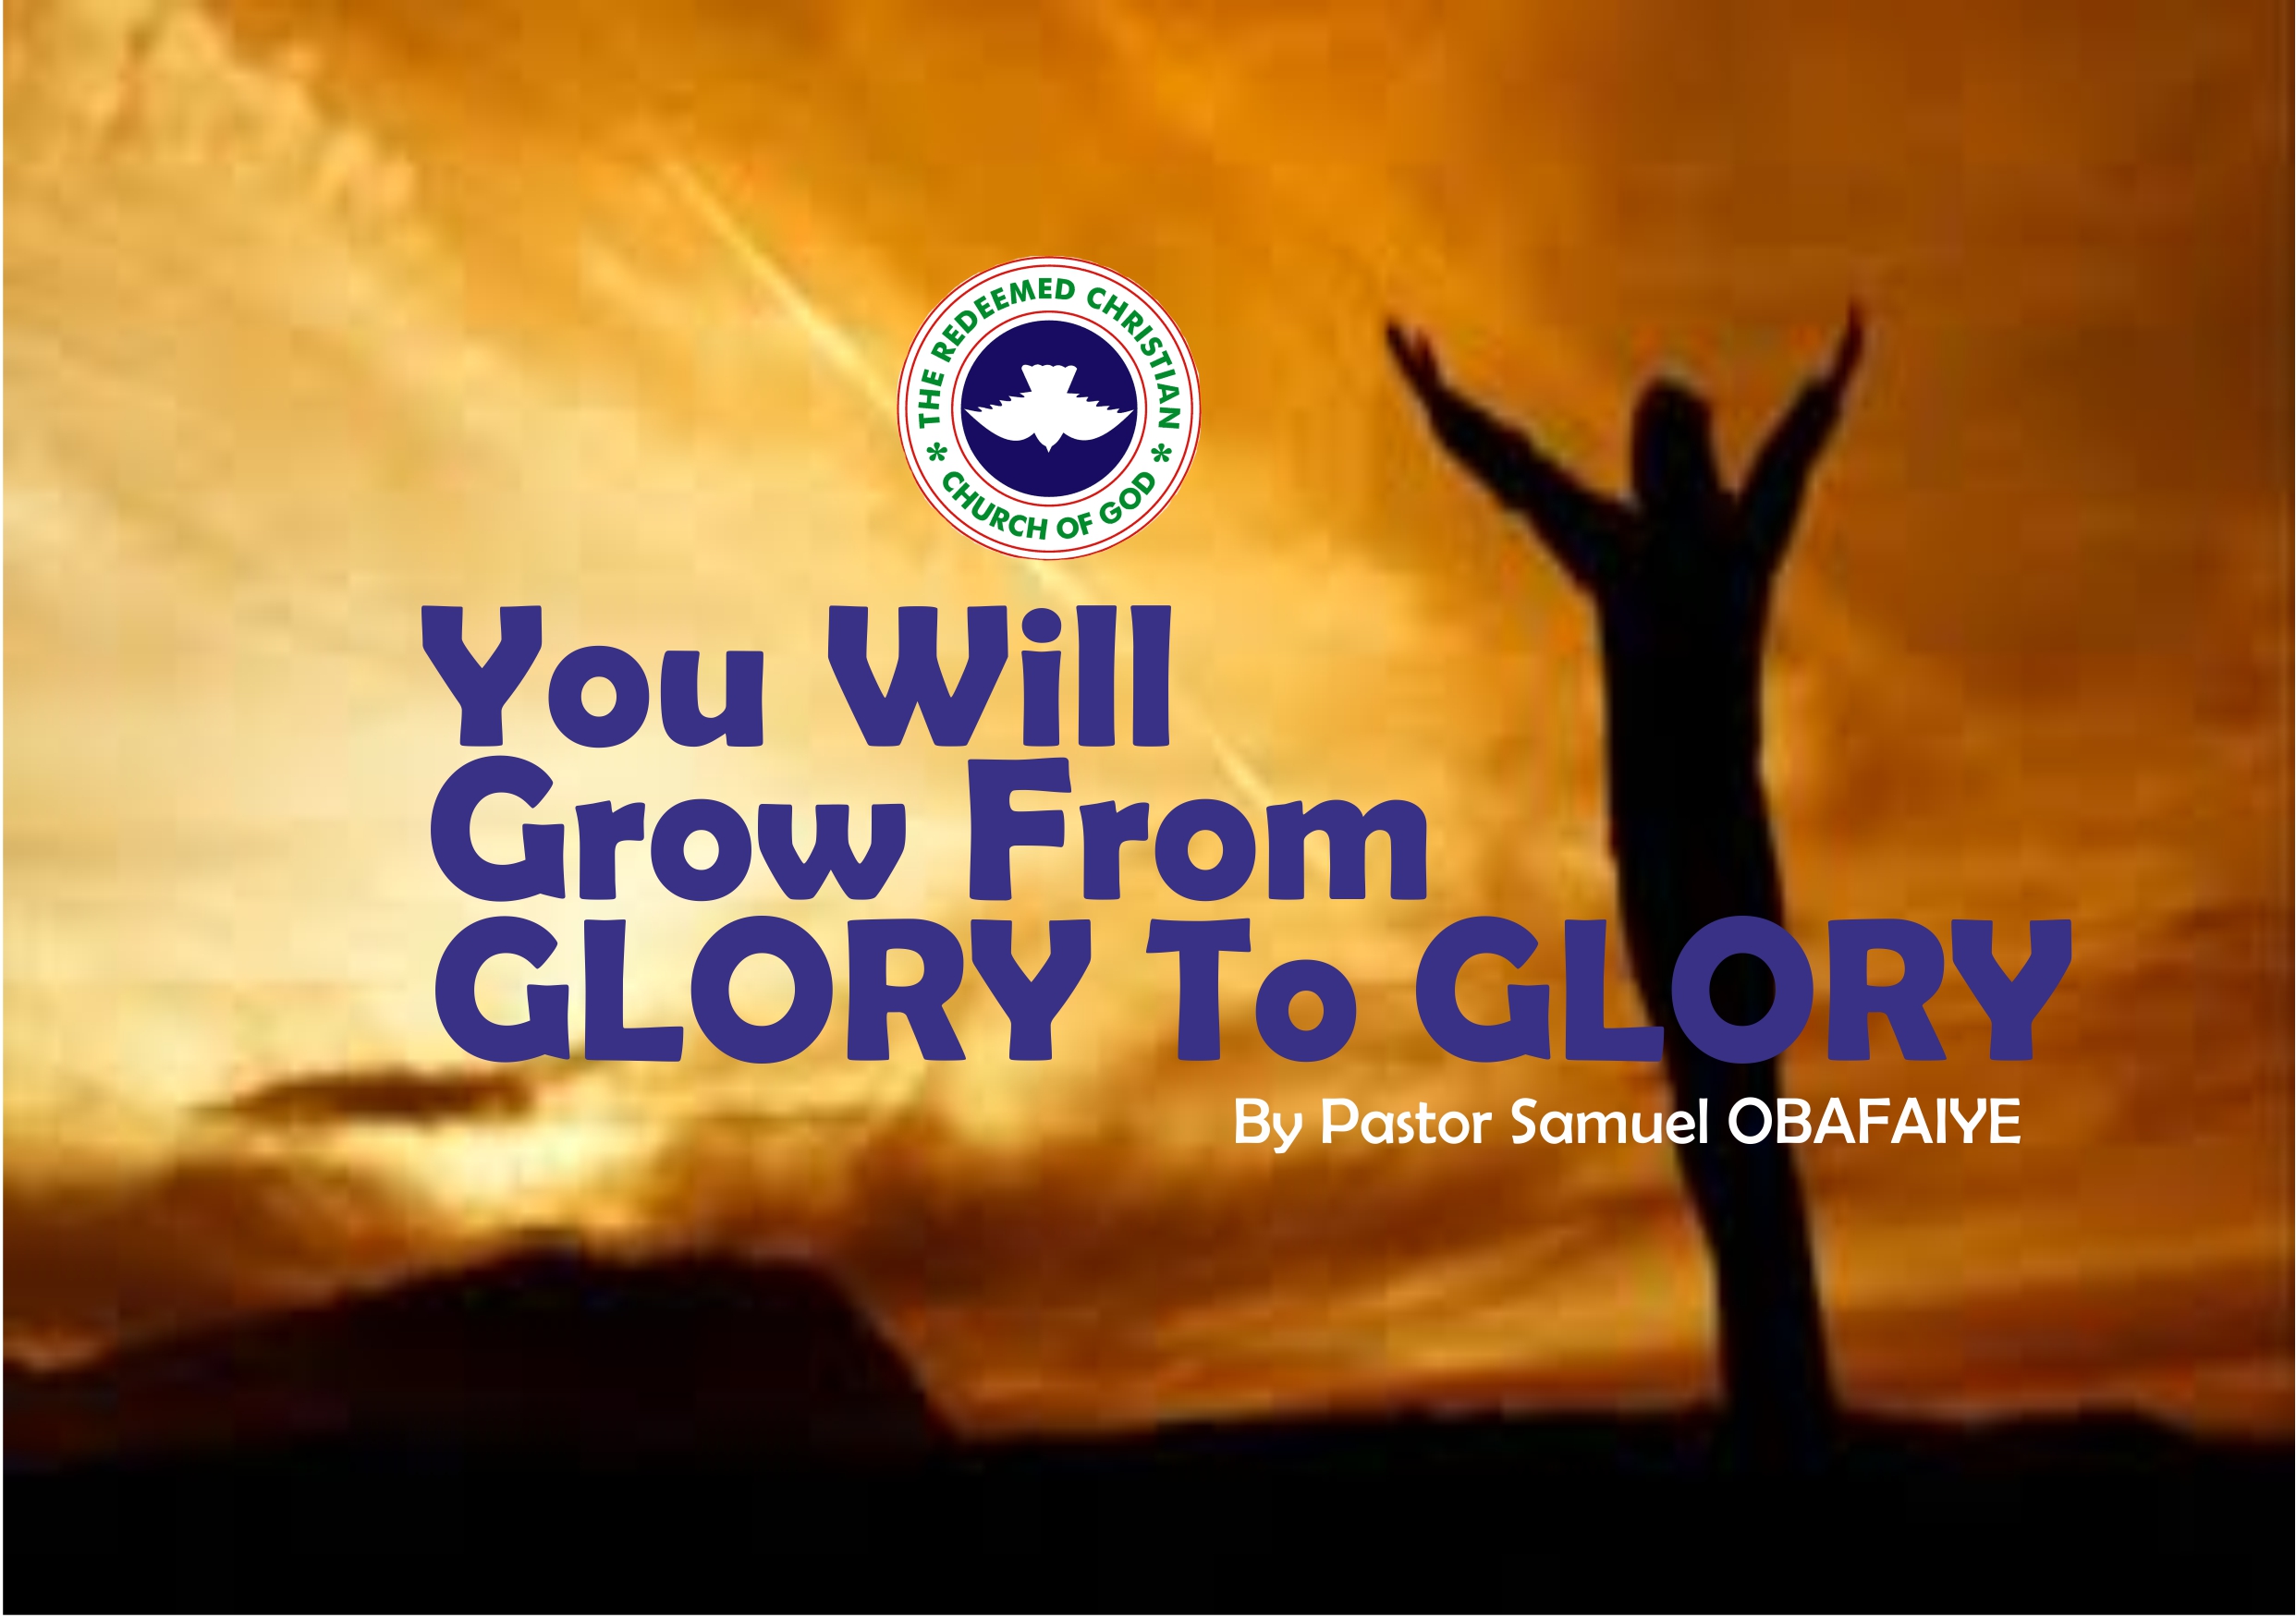 You Will Grow From Glory To Glory, by Pastor Samuel Obafaiye